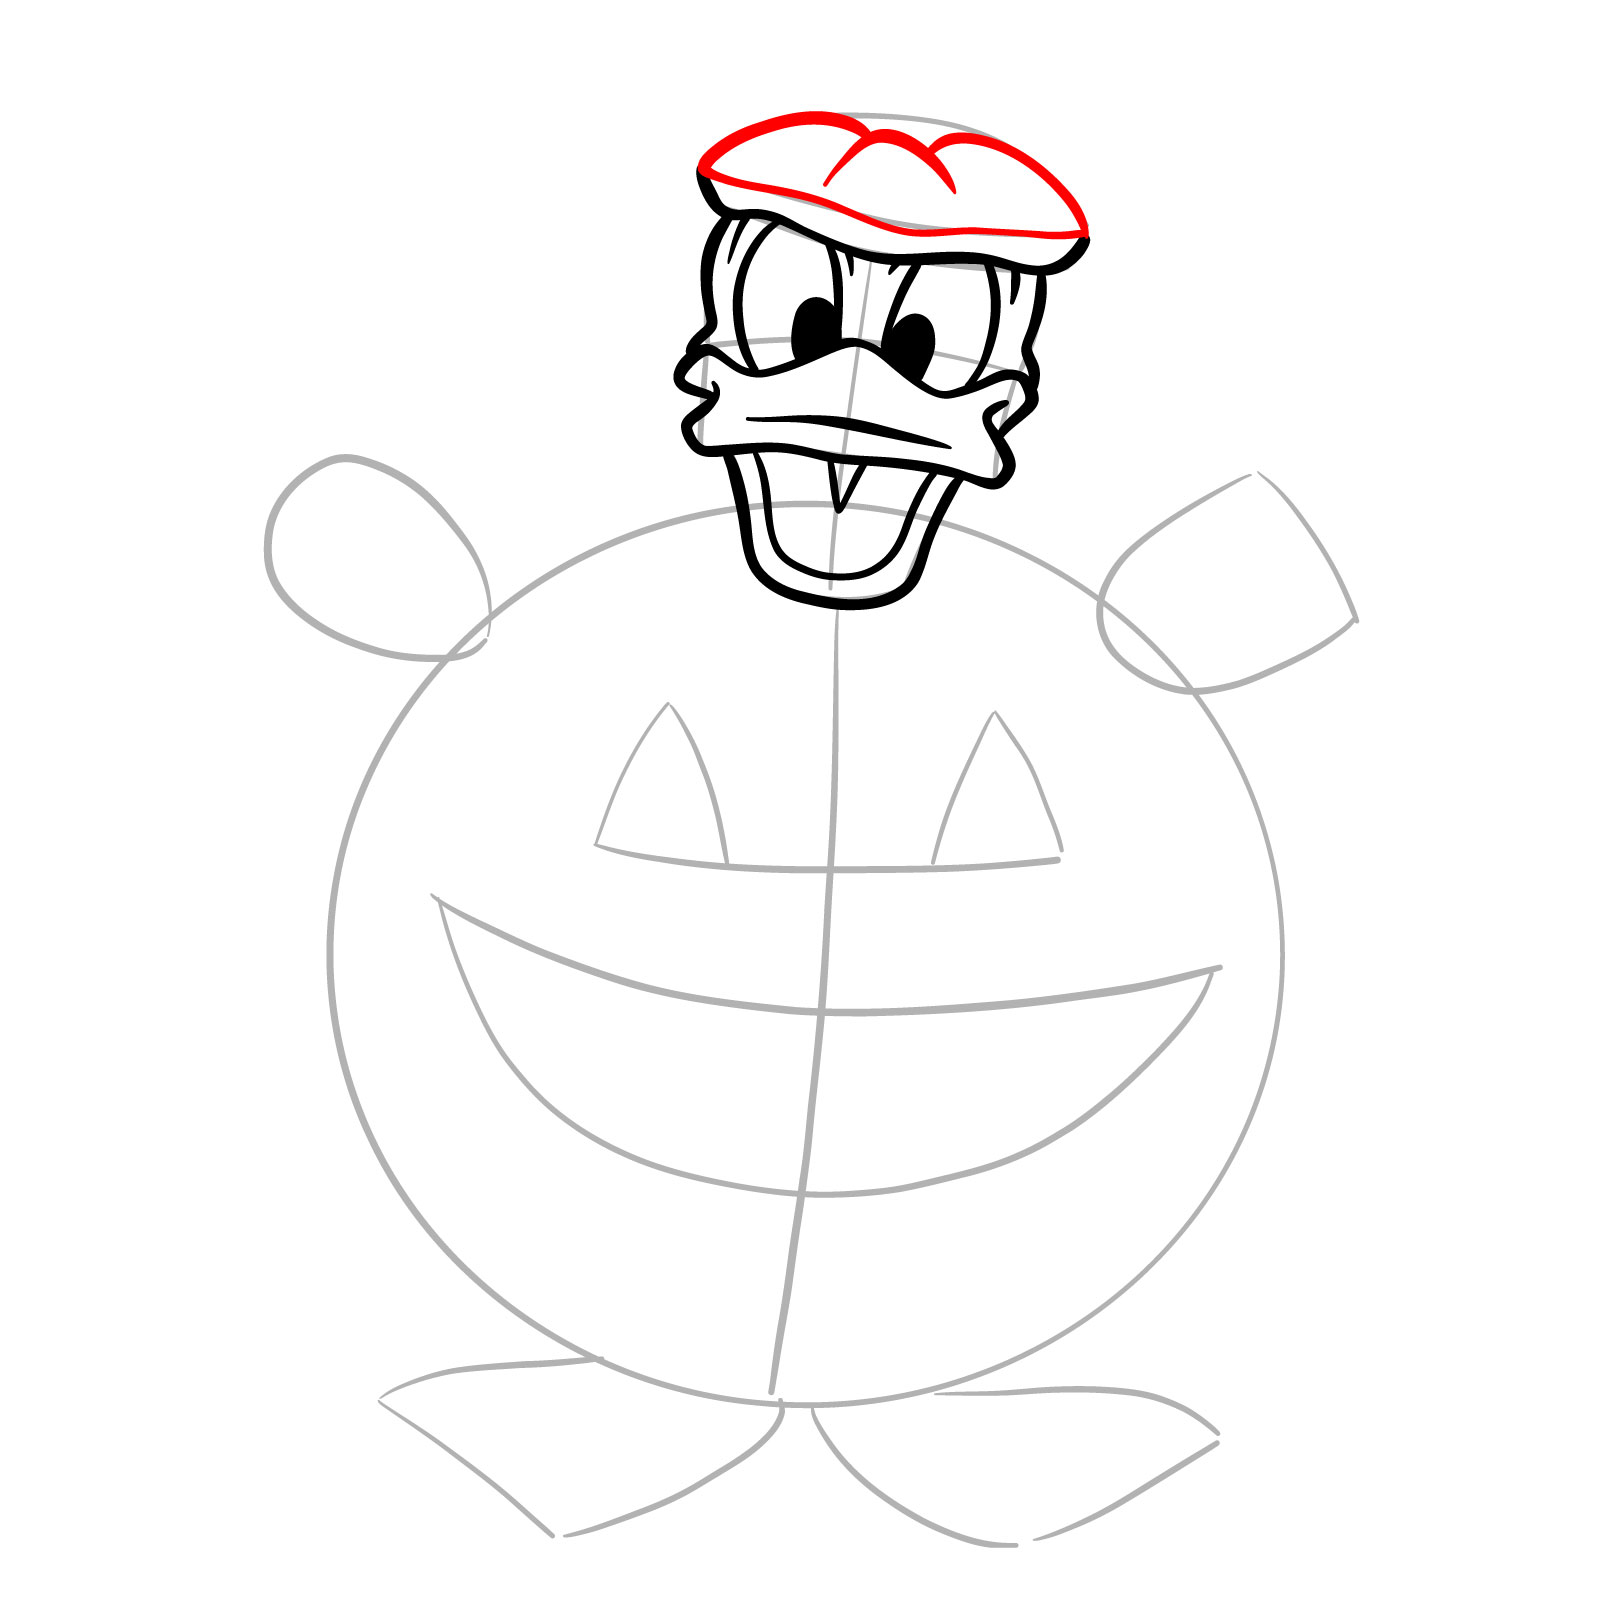 How to draw Halloween Donald Duck in a jack o'lantern - step 11